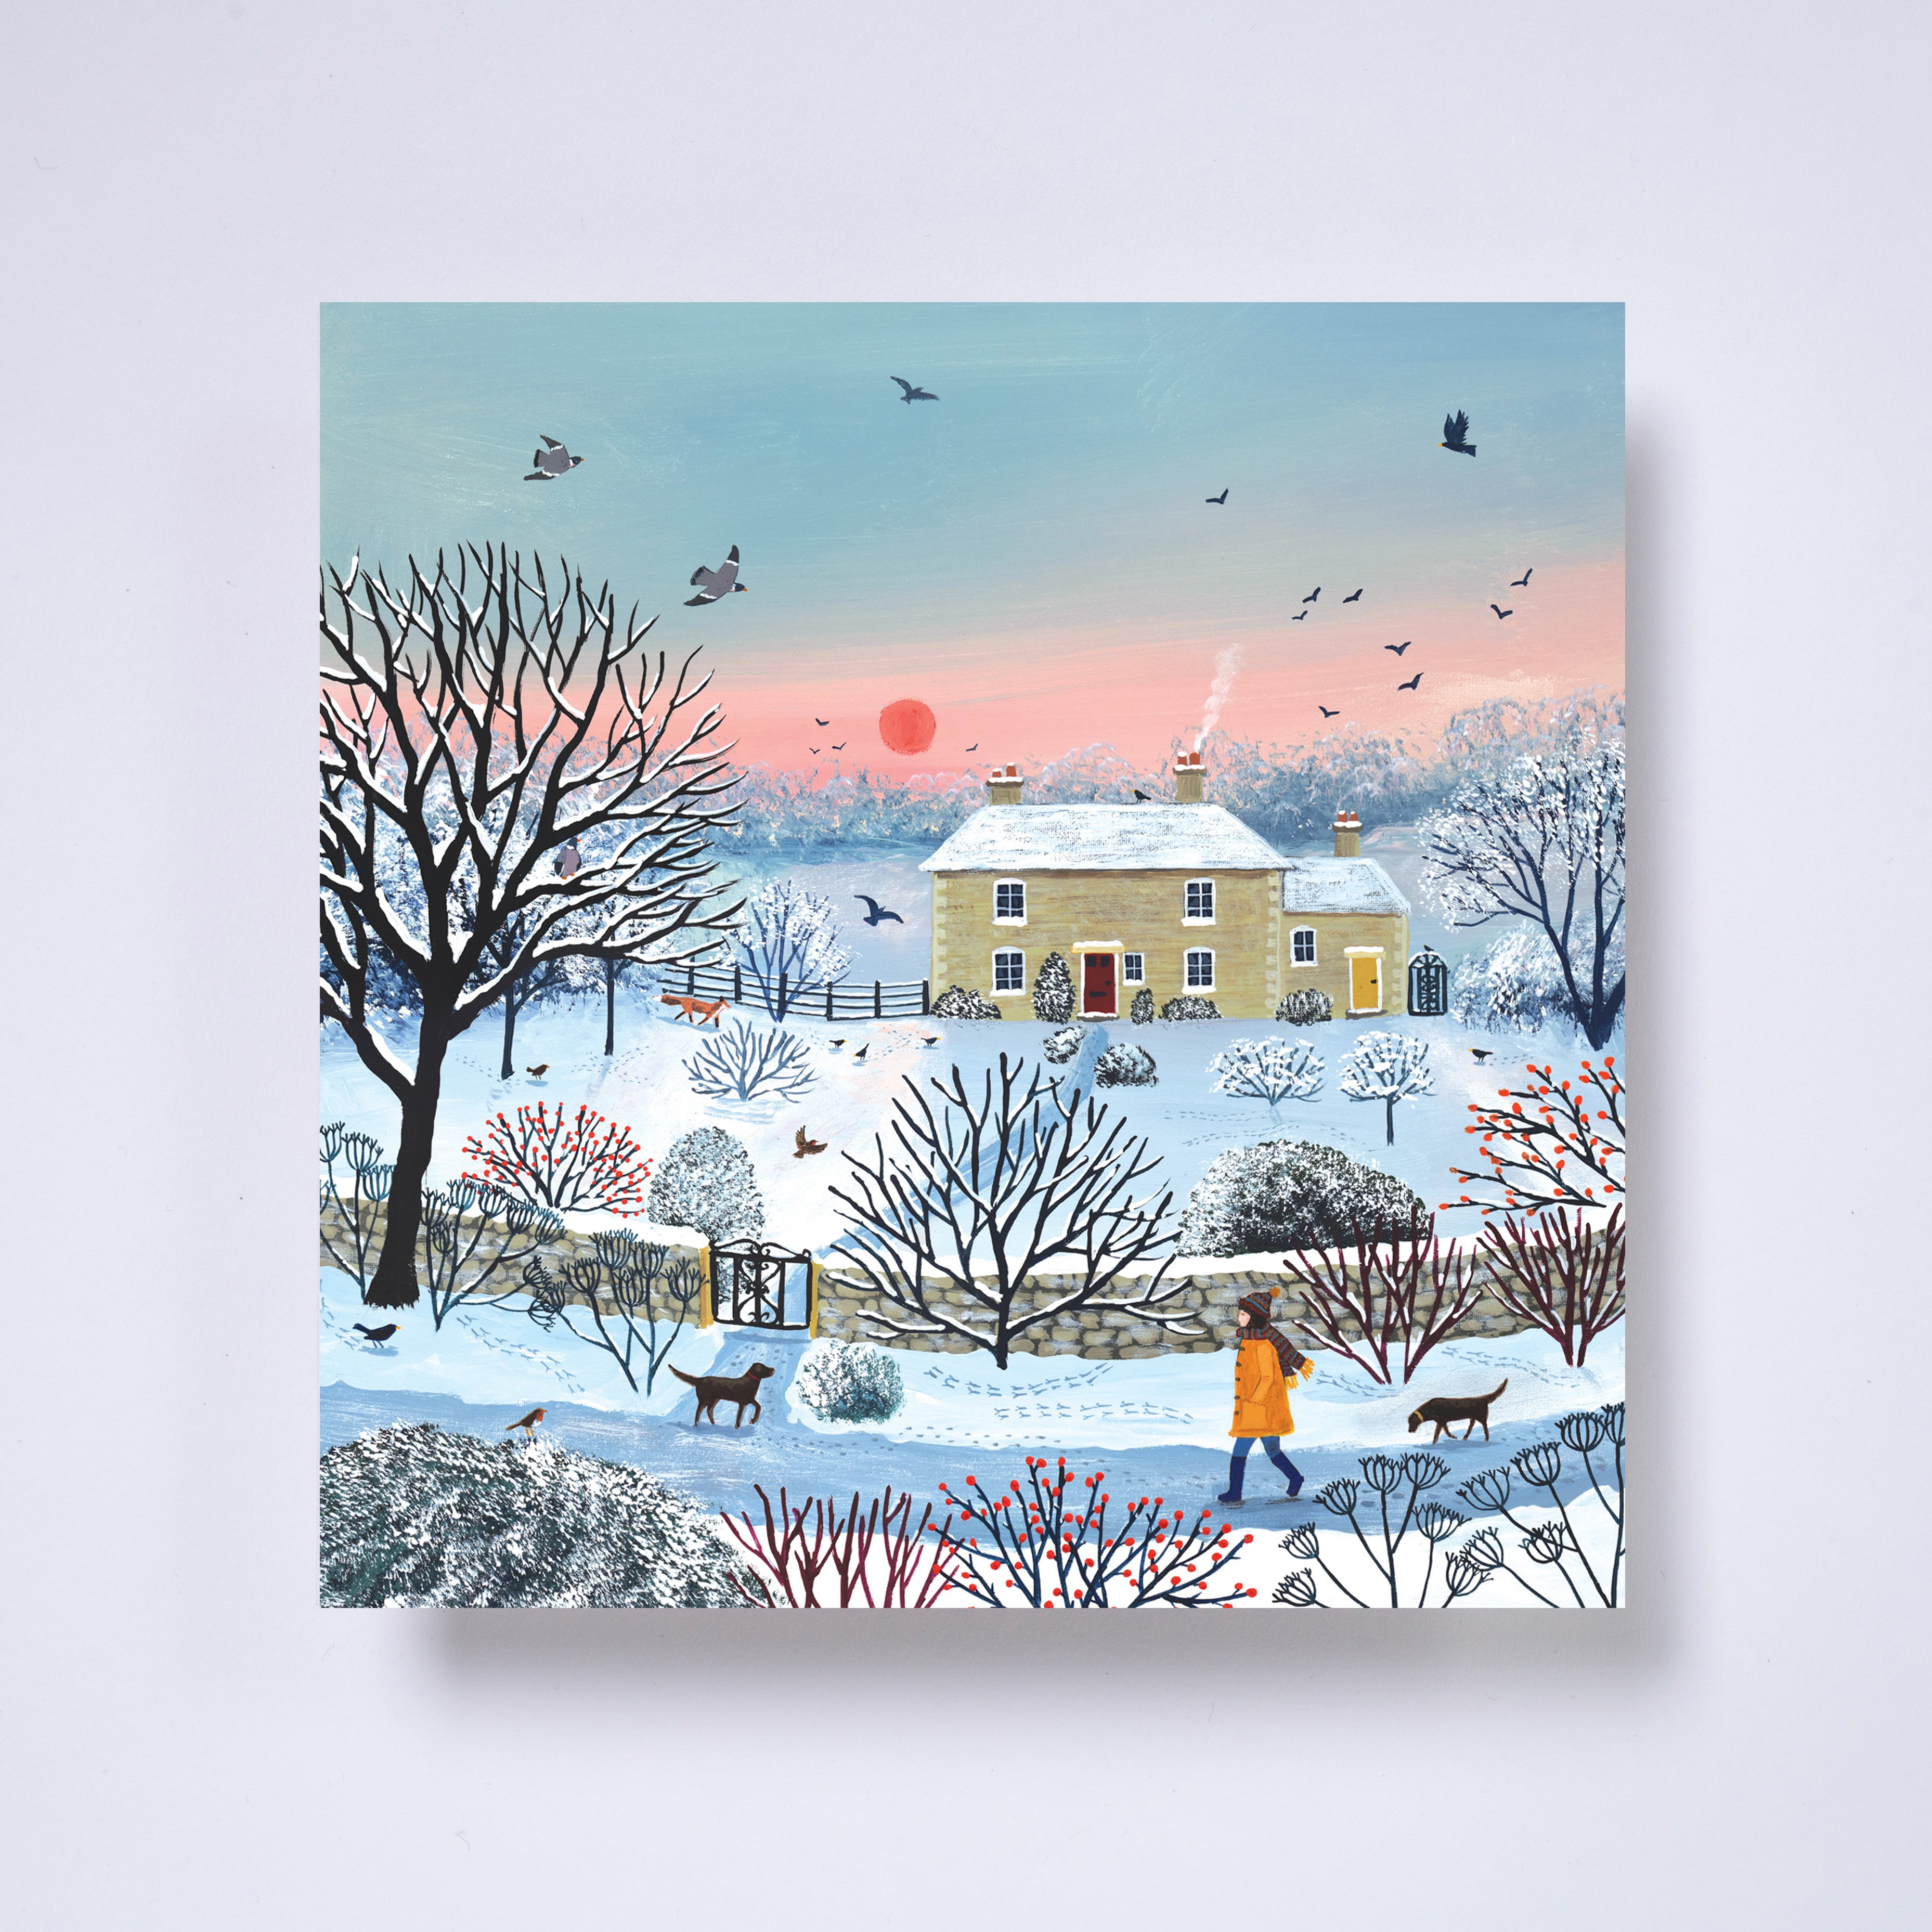 Midwinter walk - pack of 10 charity Christmas cards with envelopes